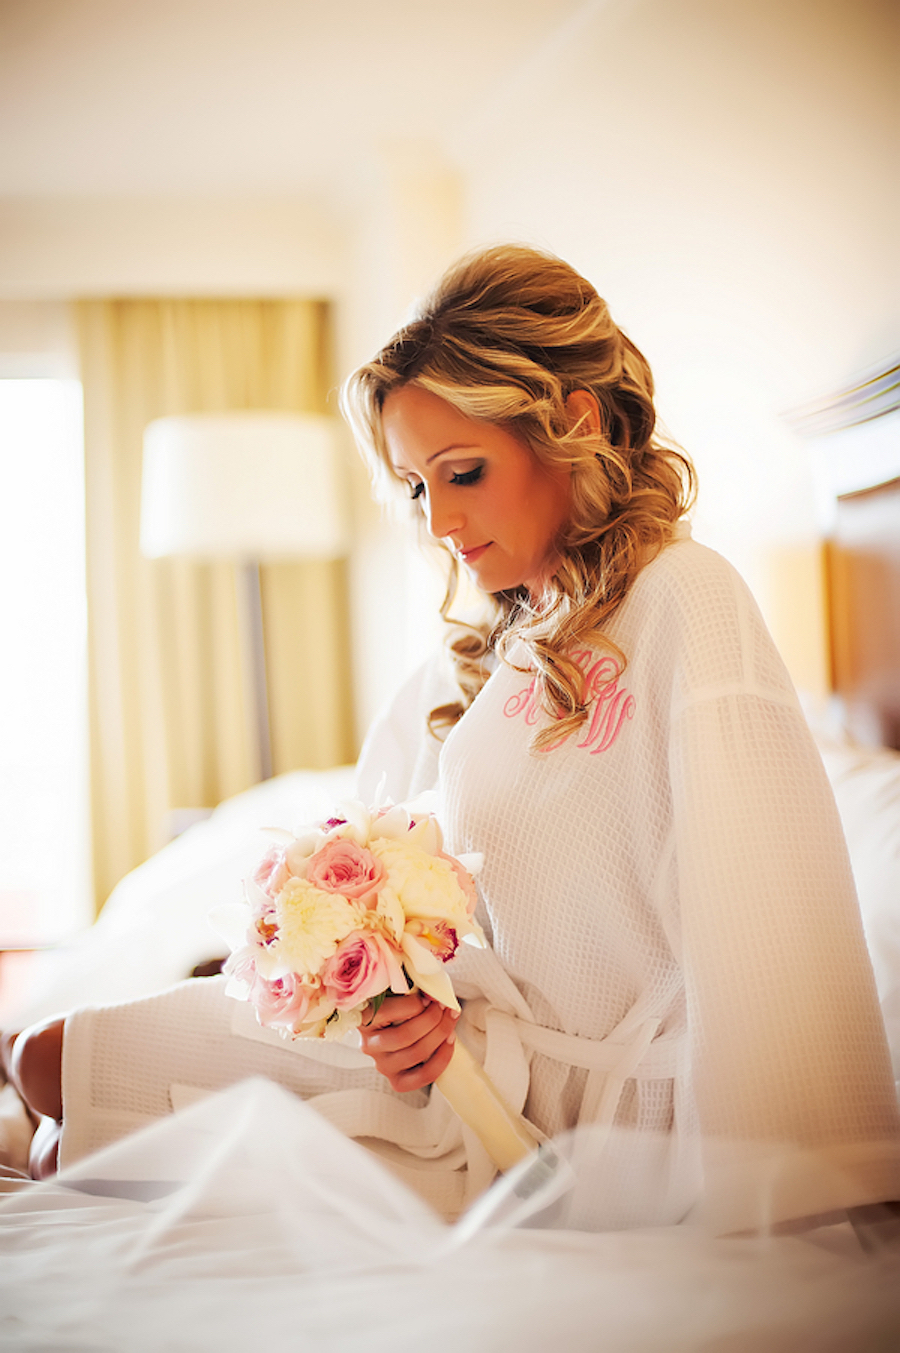 Bride Getting Ready Wedding Portrait in Robe with Pink and Ivory Wedding Bouquet | Clearwater Beach Wedding Photographer Limelight Photography